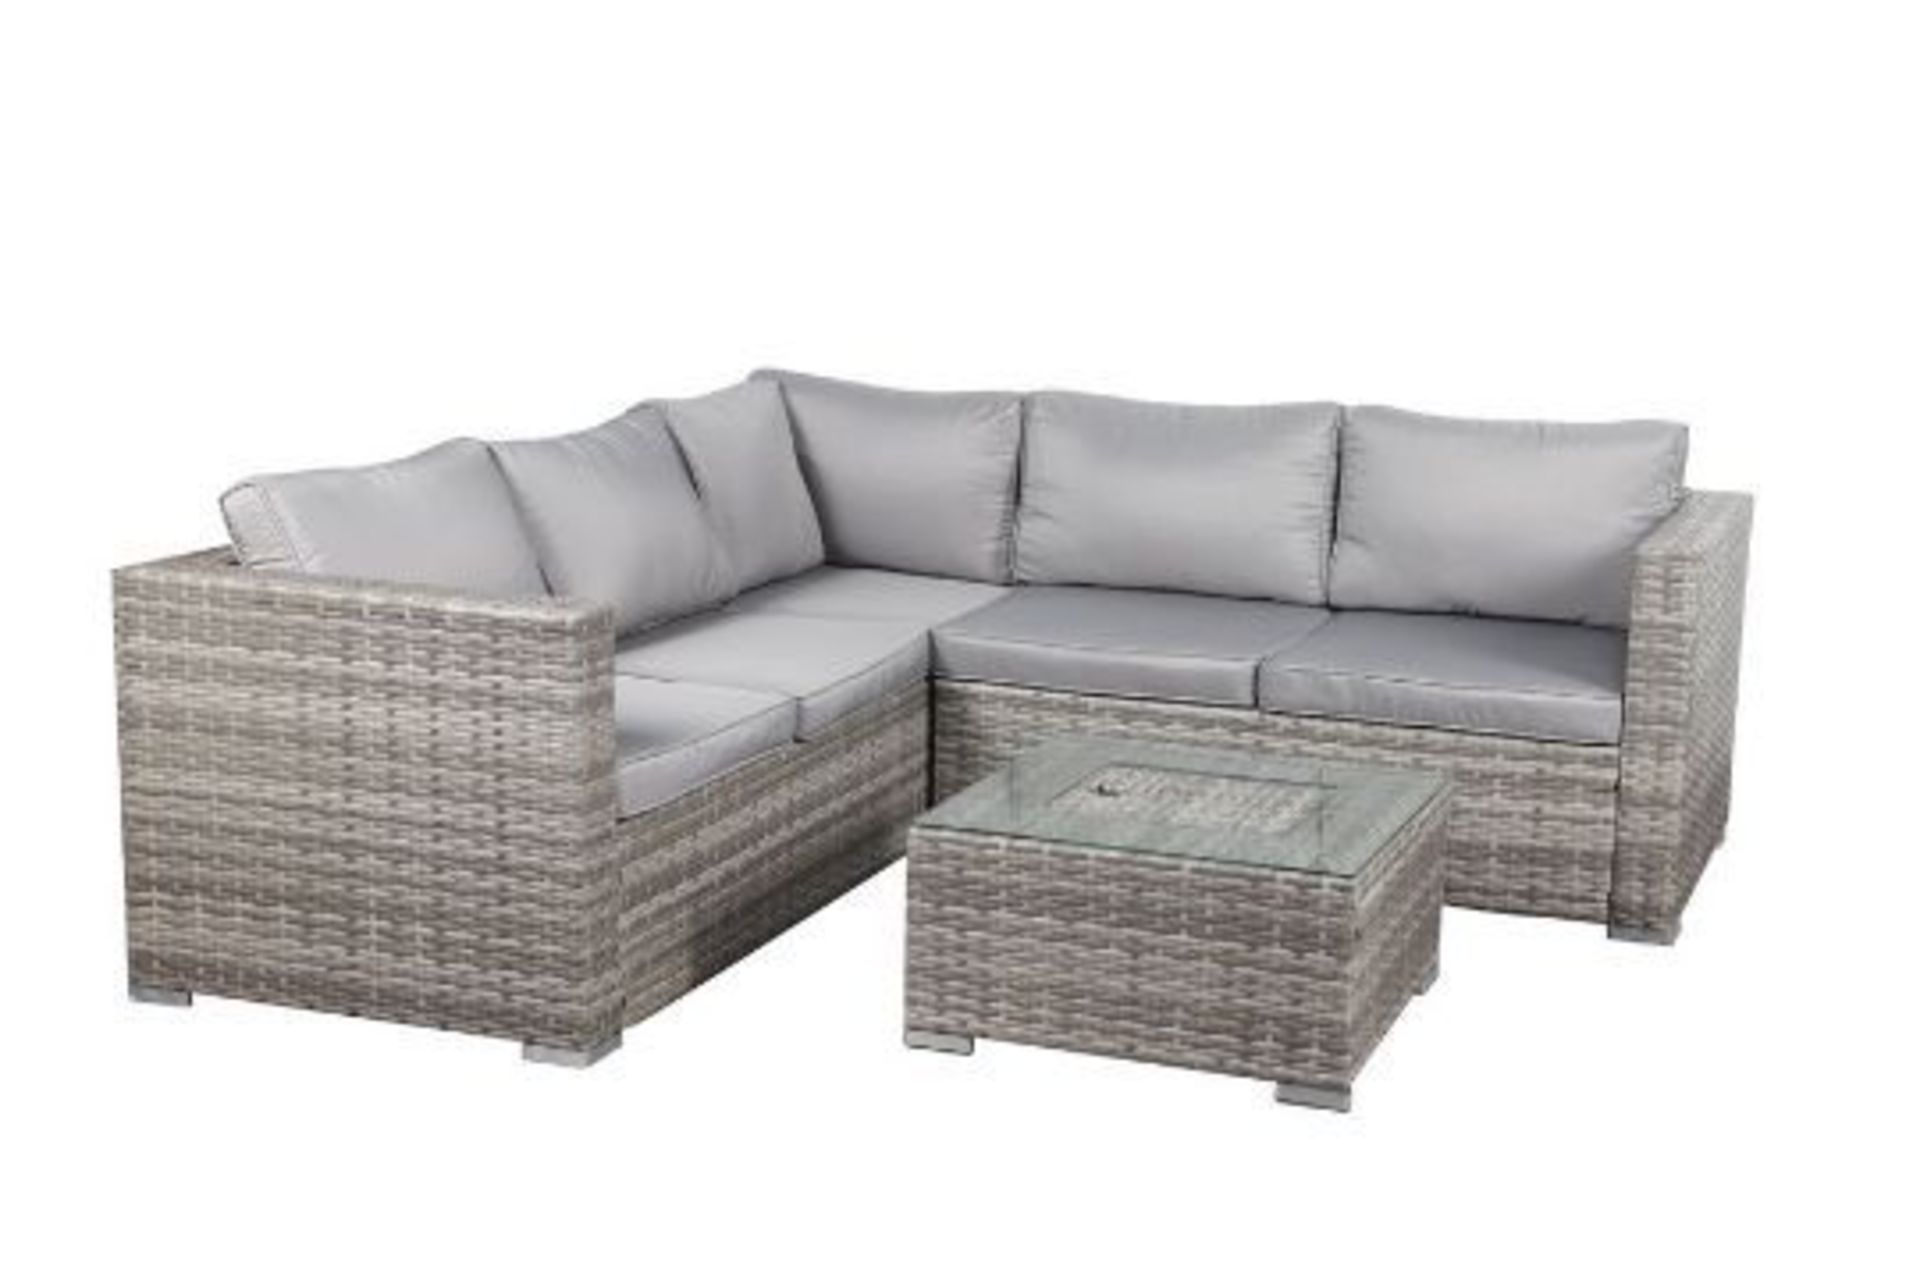 Brand new set of garden furniture with ice storage box built into the table, RRP £999 *PLUS VAT*